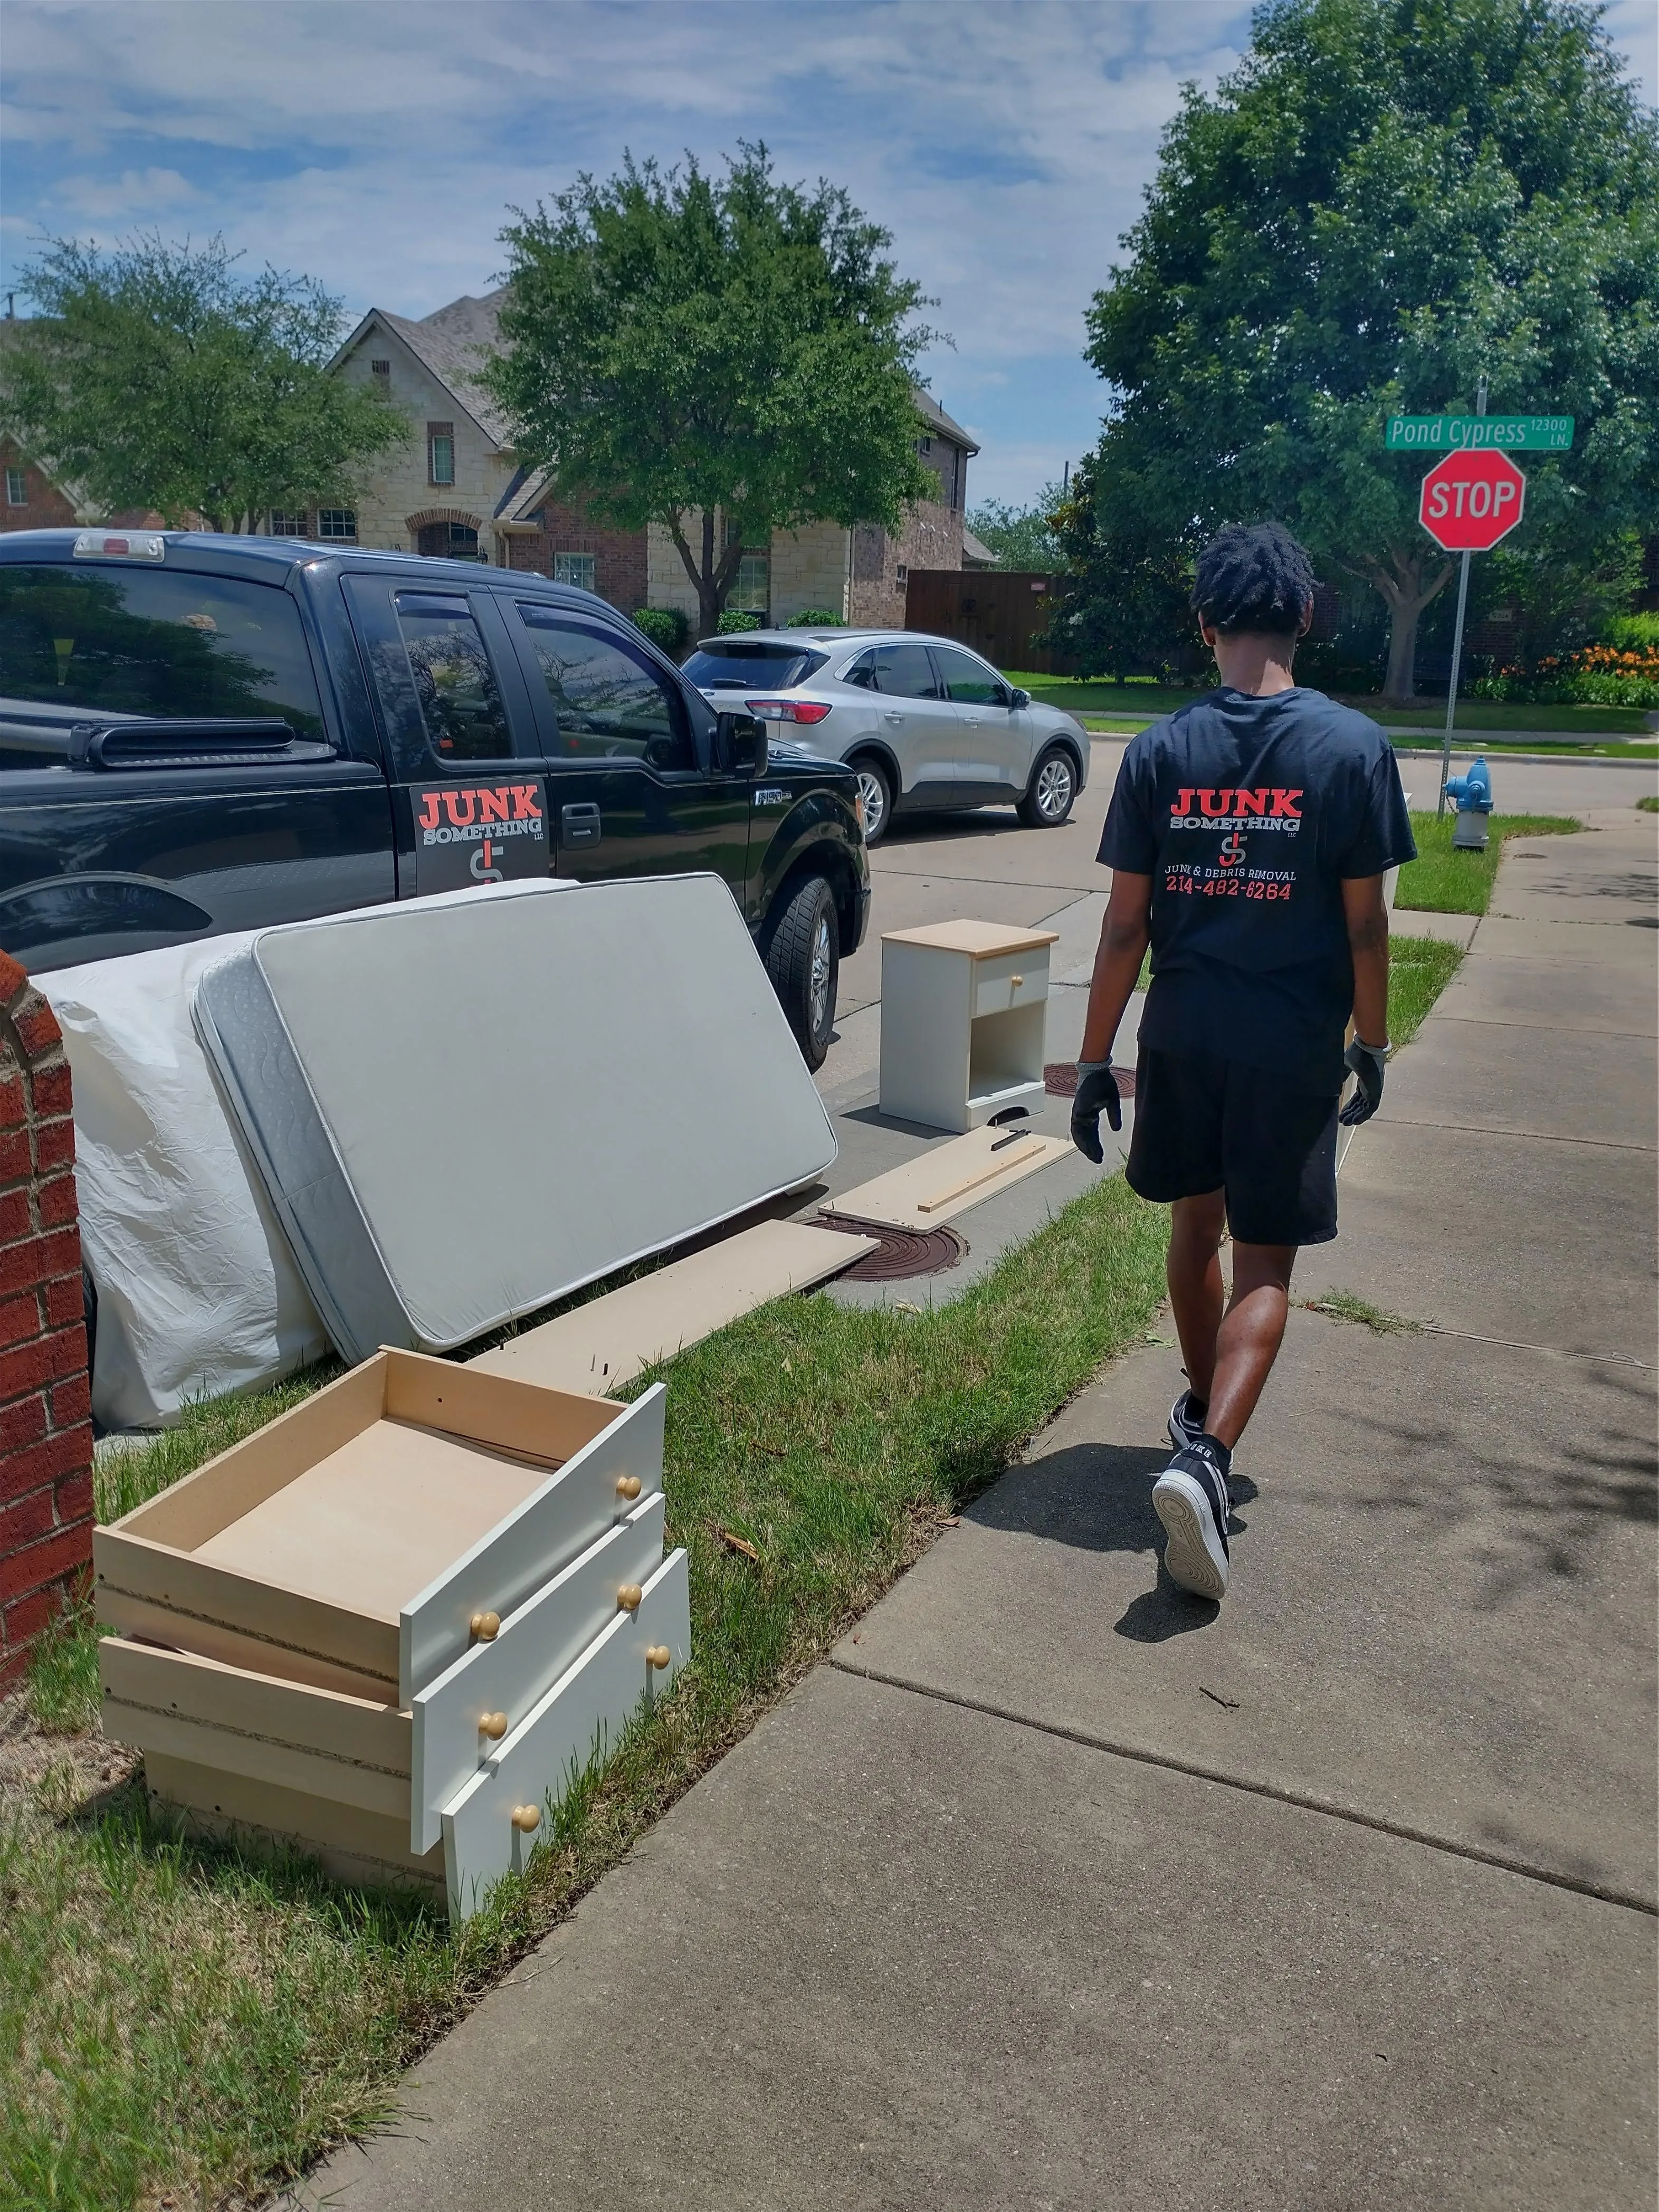 Appliance Removal for Junk Something llc in Dallas, TX